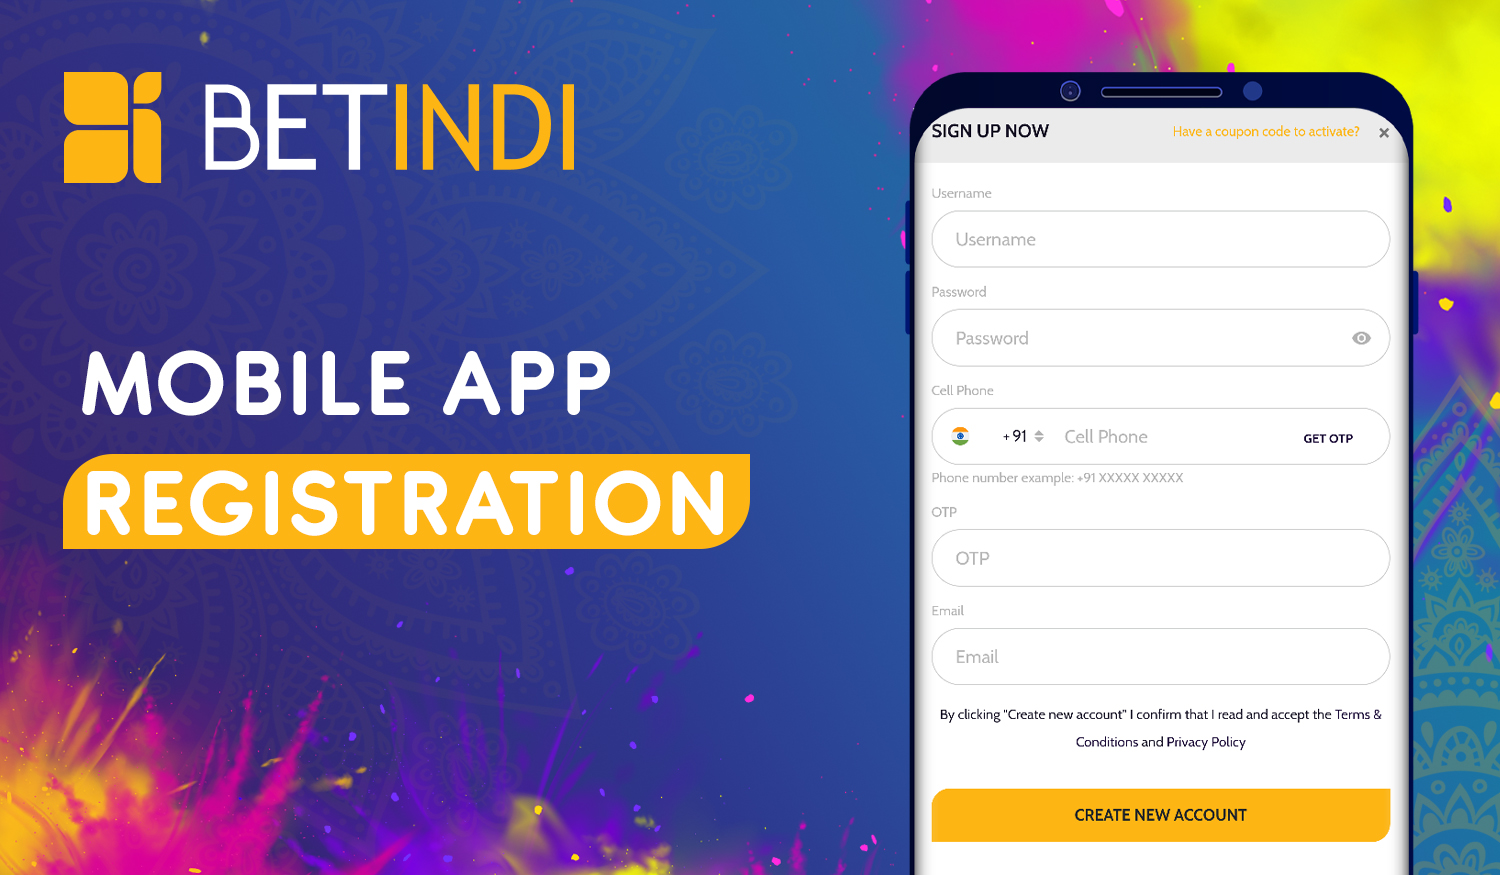 How to create a new account in the Betindi app 